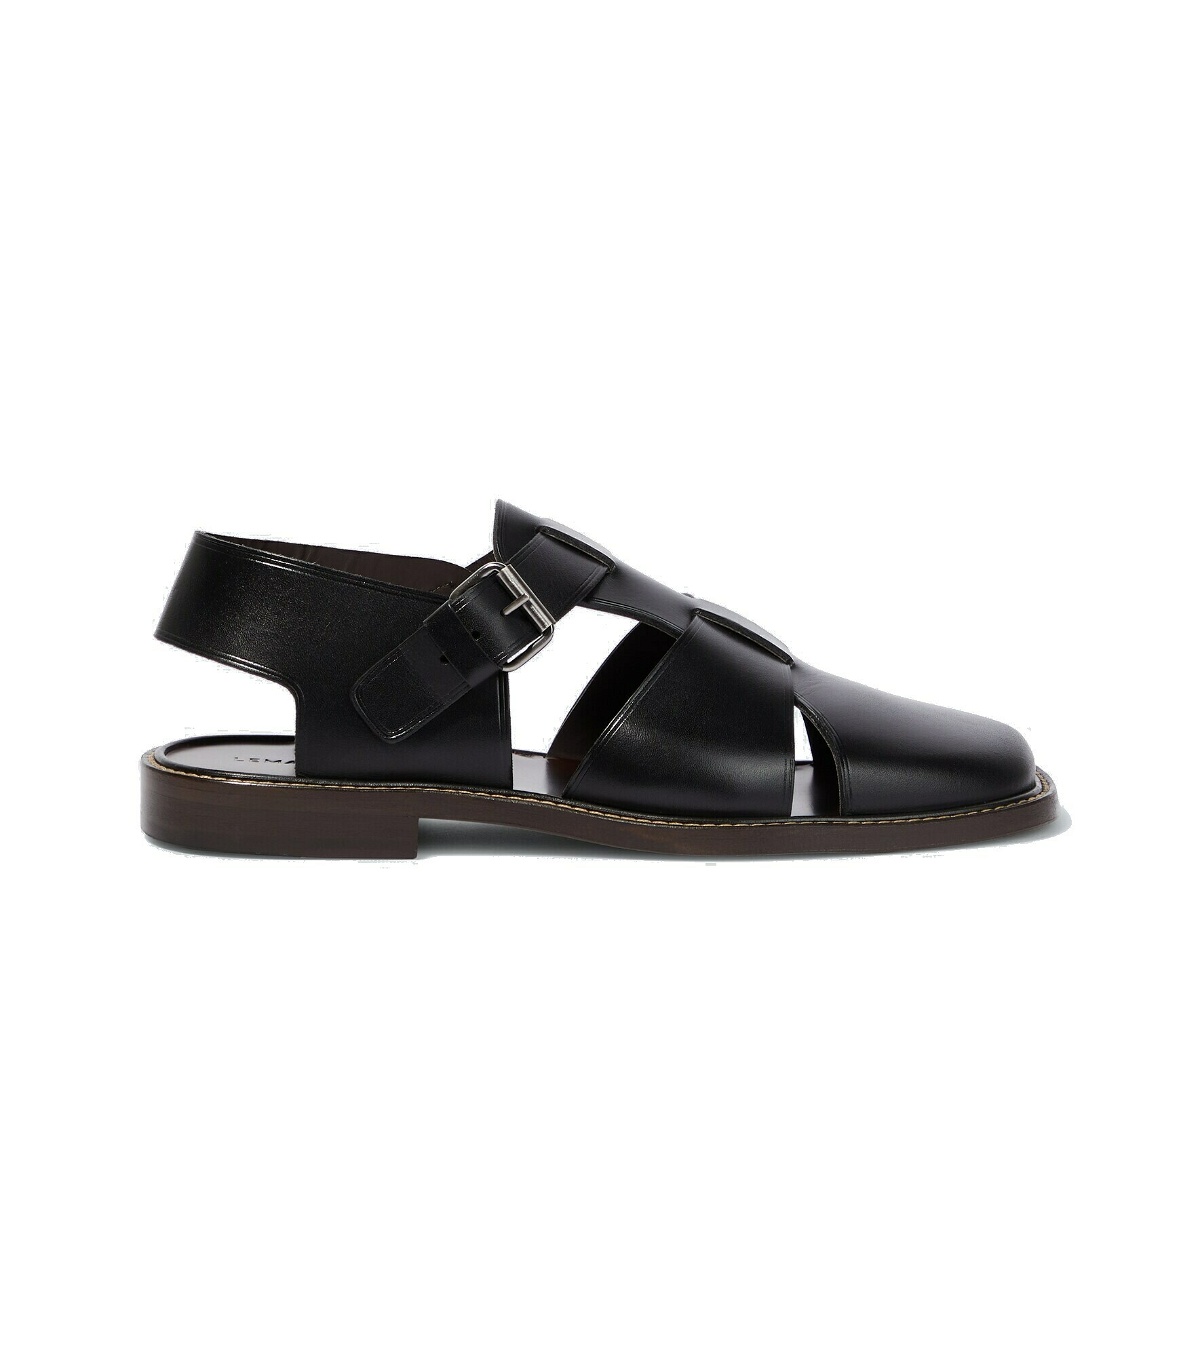 Lemaire - Fisherman leather sandals Lemaire